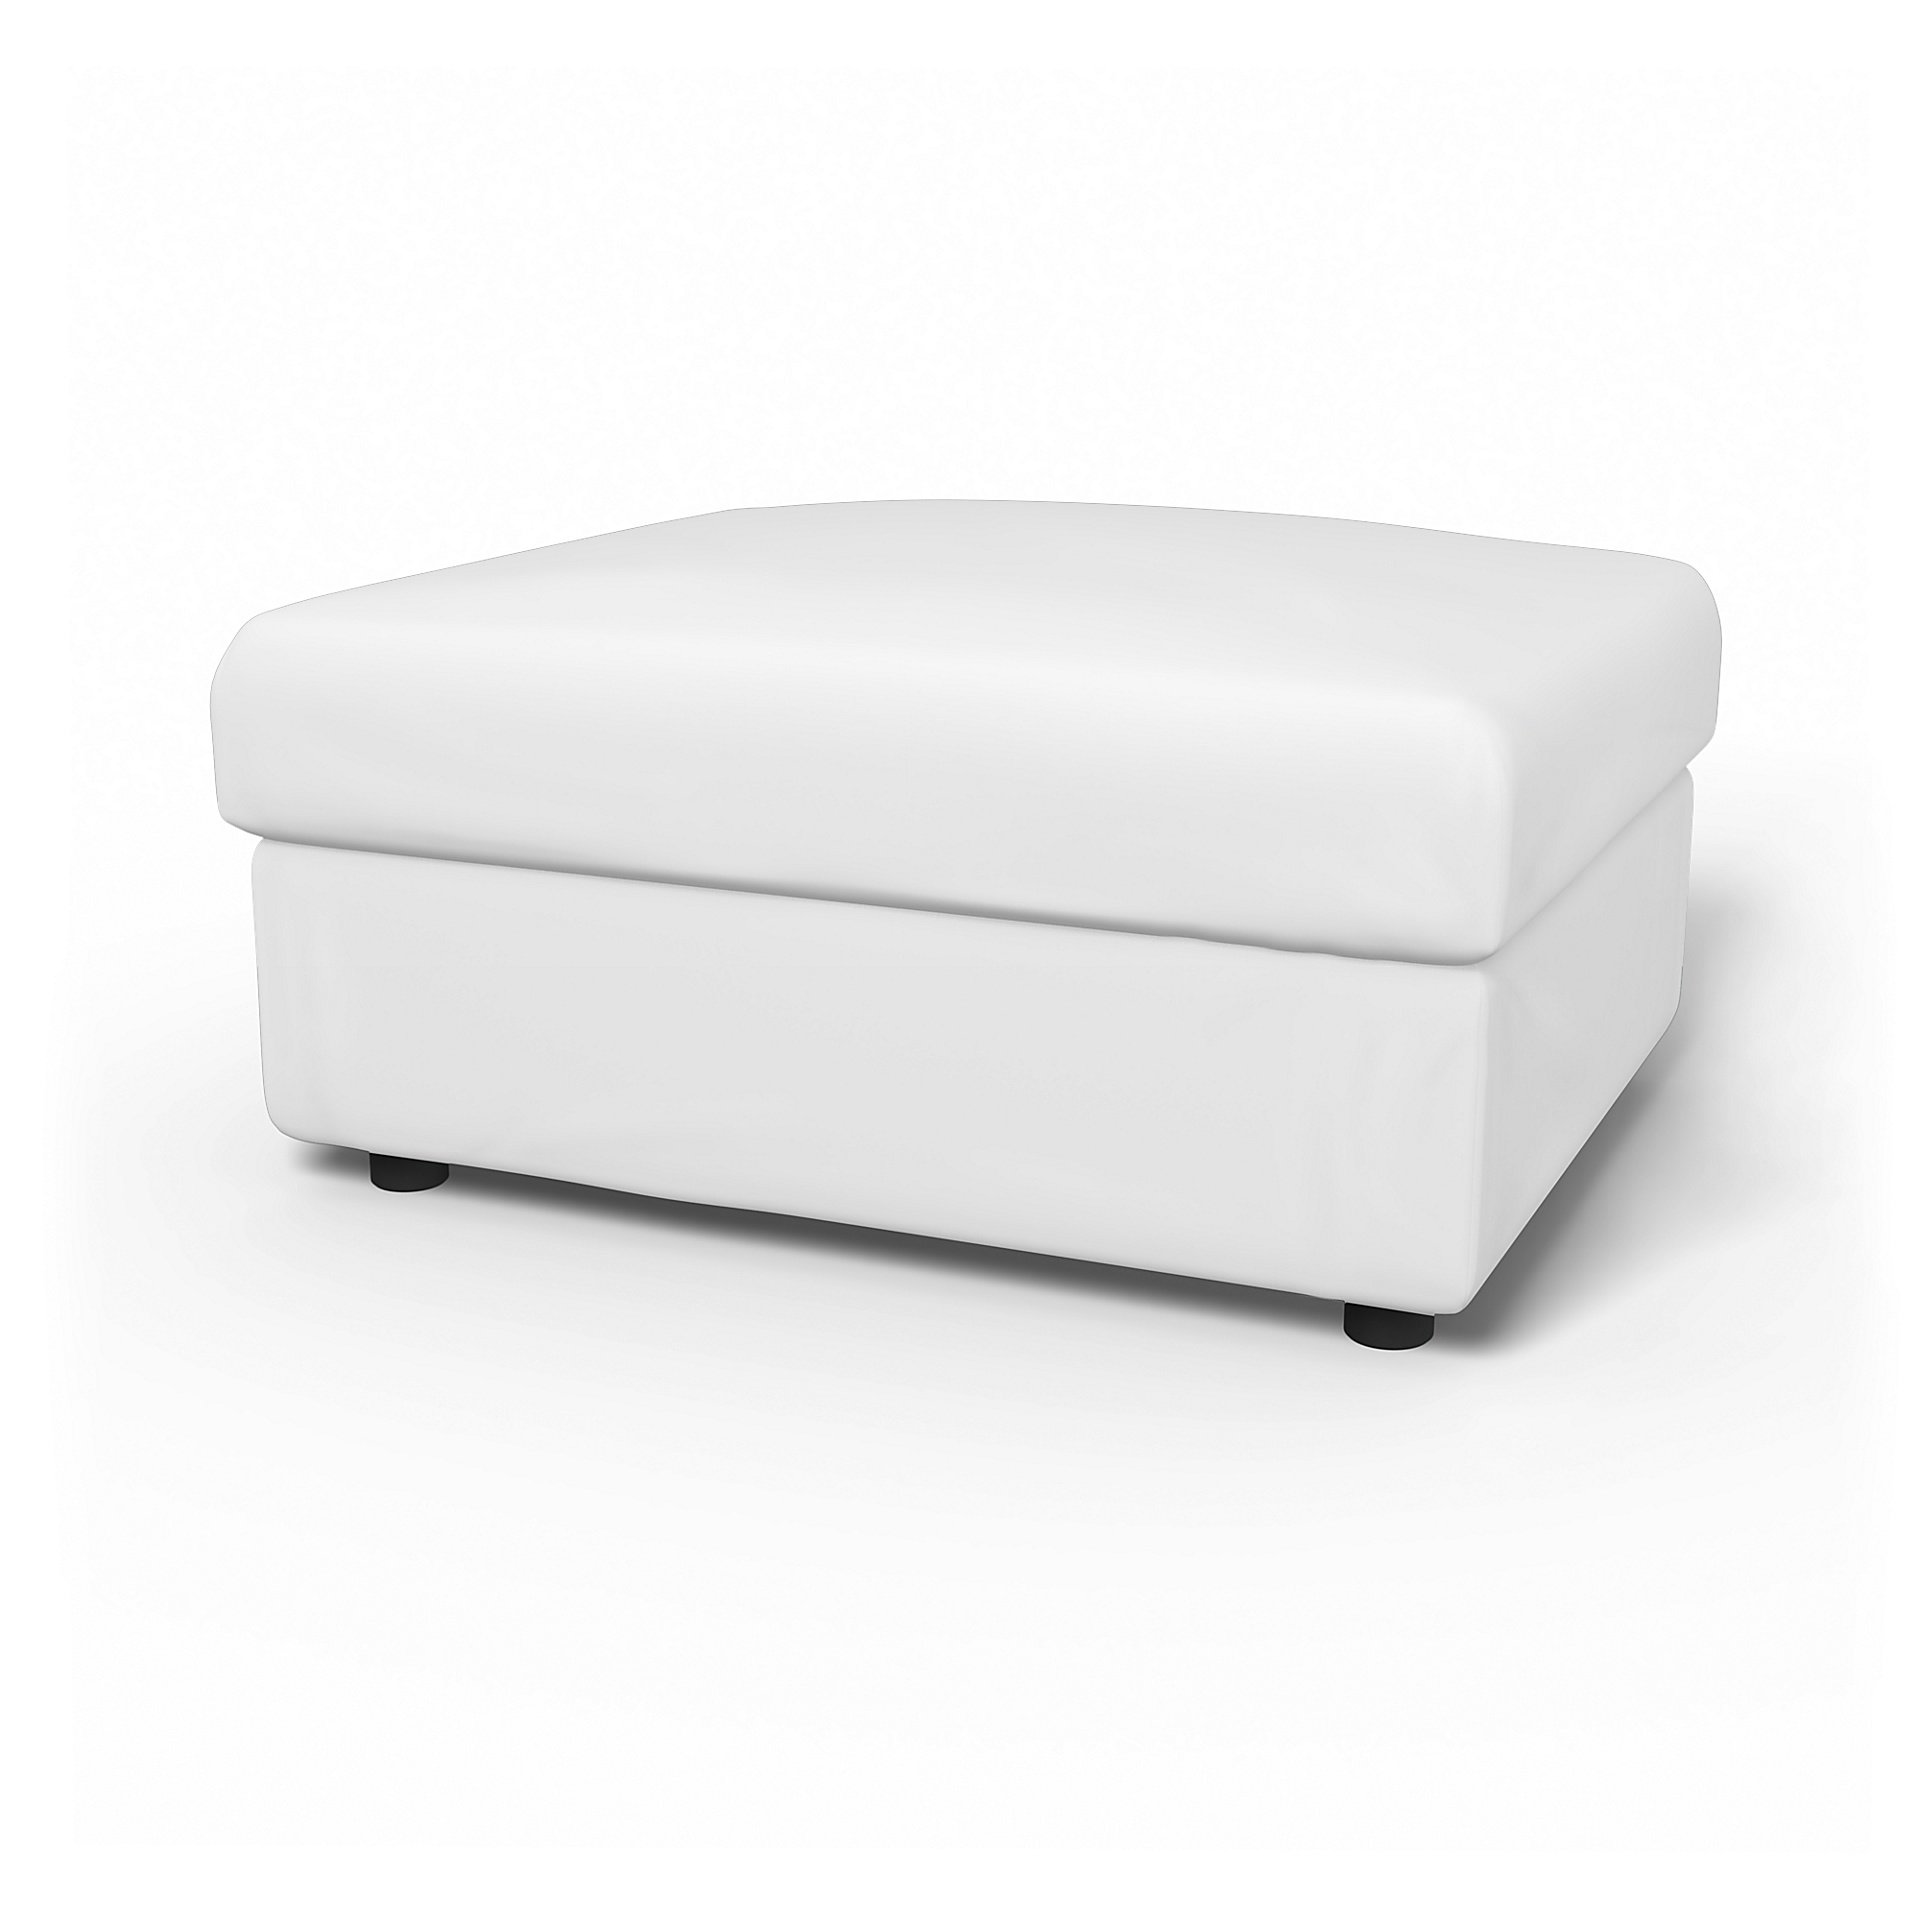 IKEA - Vimle Footstool with Storage Cover, Absolute White, Linen - Bemz